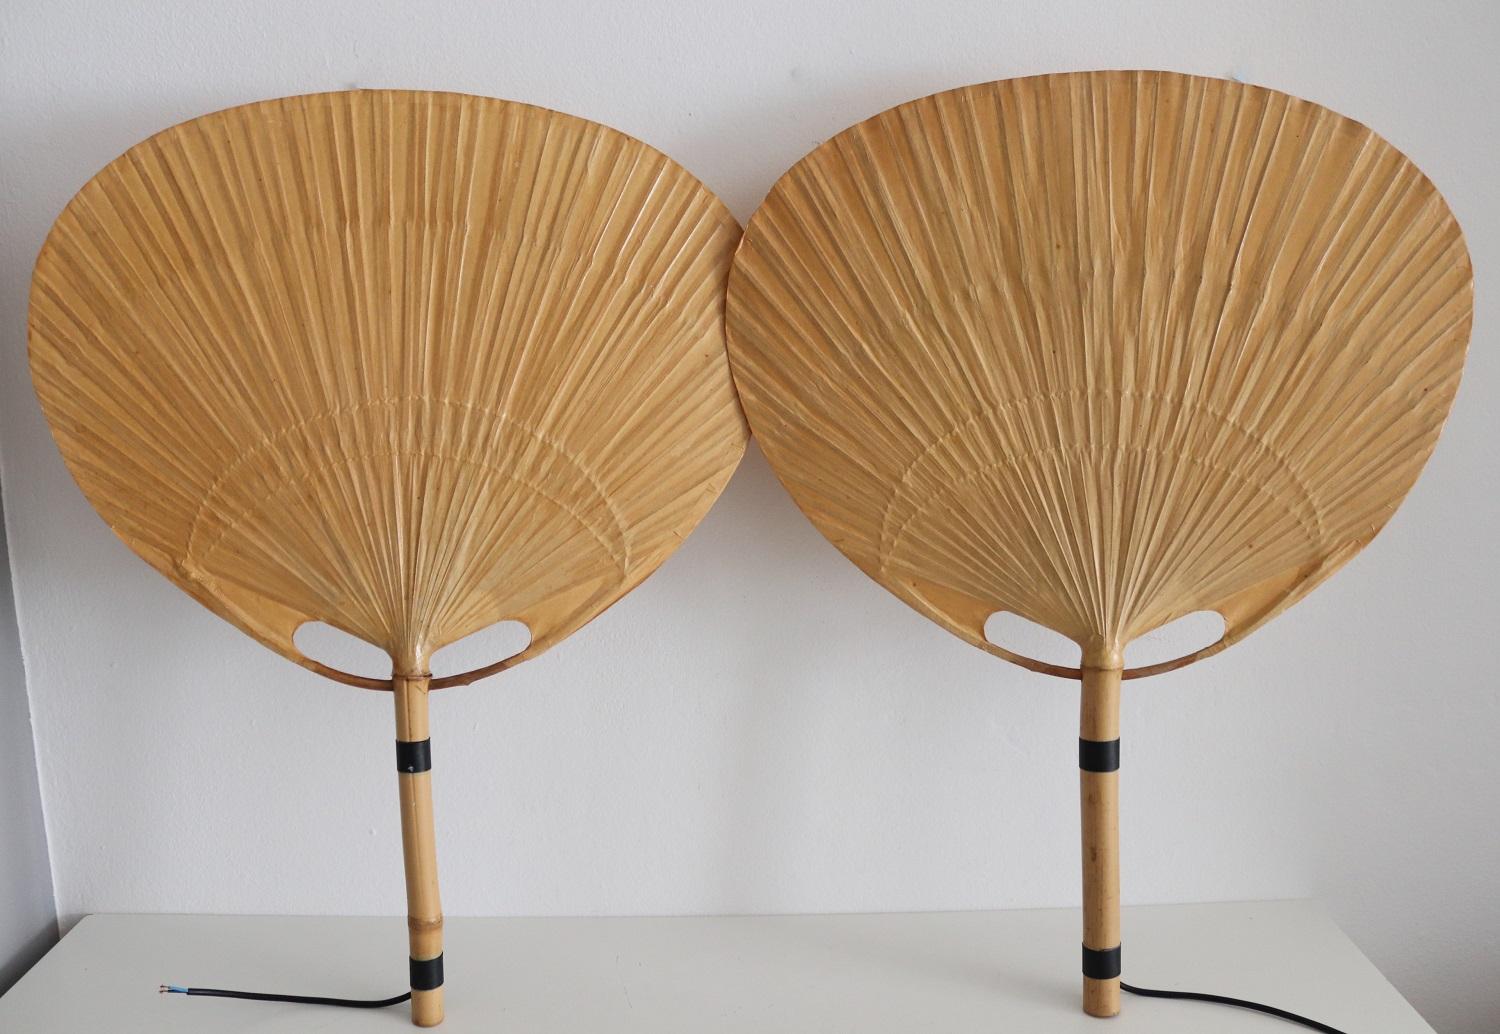 Two pieces of big vintage Uchiwa fan lamps with metal holder for wall hanging.
Designed from Ingo Maurer, Germany in 1973. One light is equipped with original label 